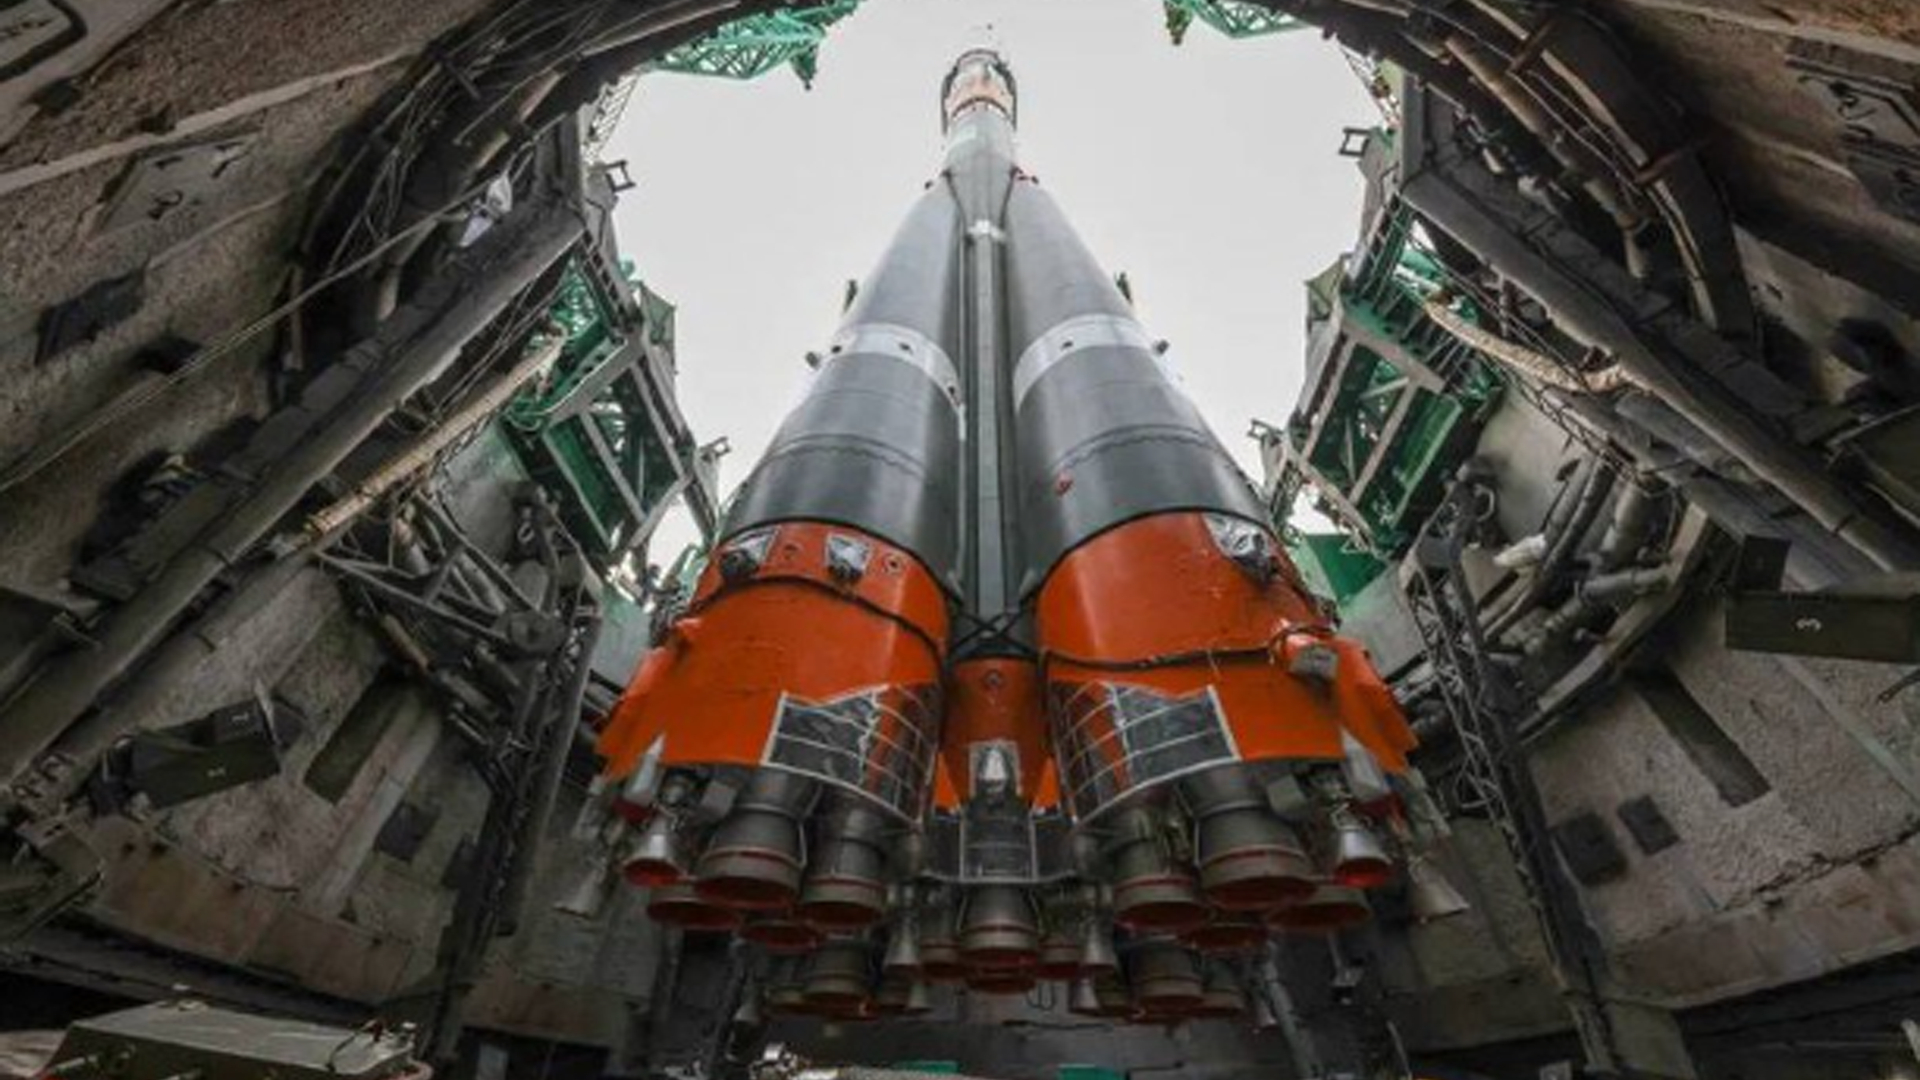 A Russian Soyuz rocket with the Soyuz MS-23 crew capsule on its launch pad at the Baikonur Cosmodrome in Kazakhstan for a launch on February 23, 2023.